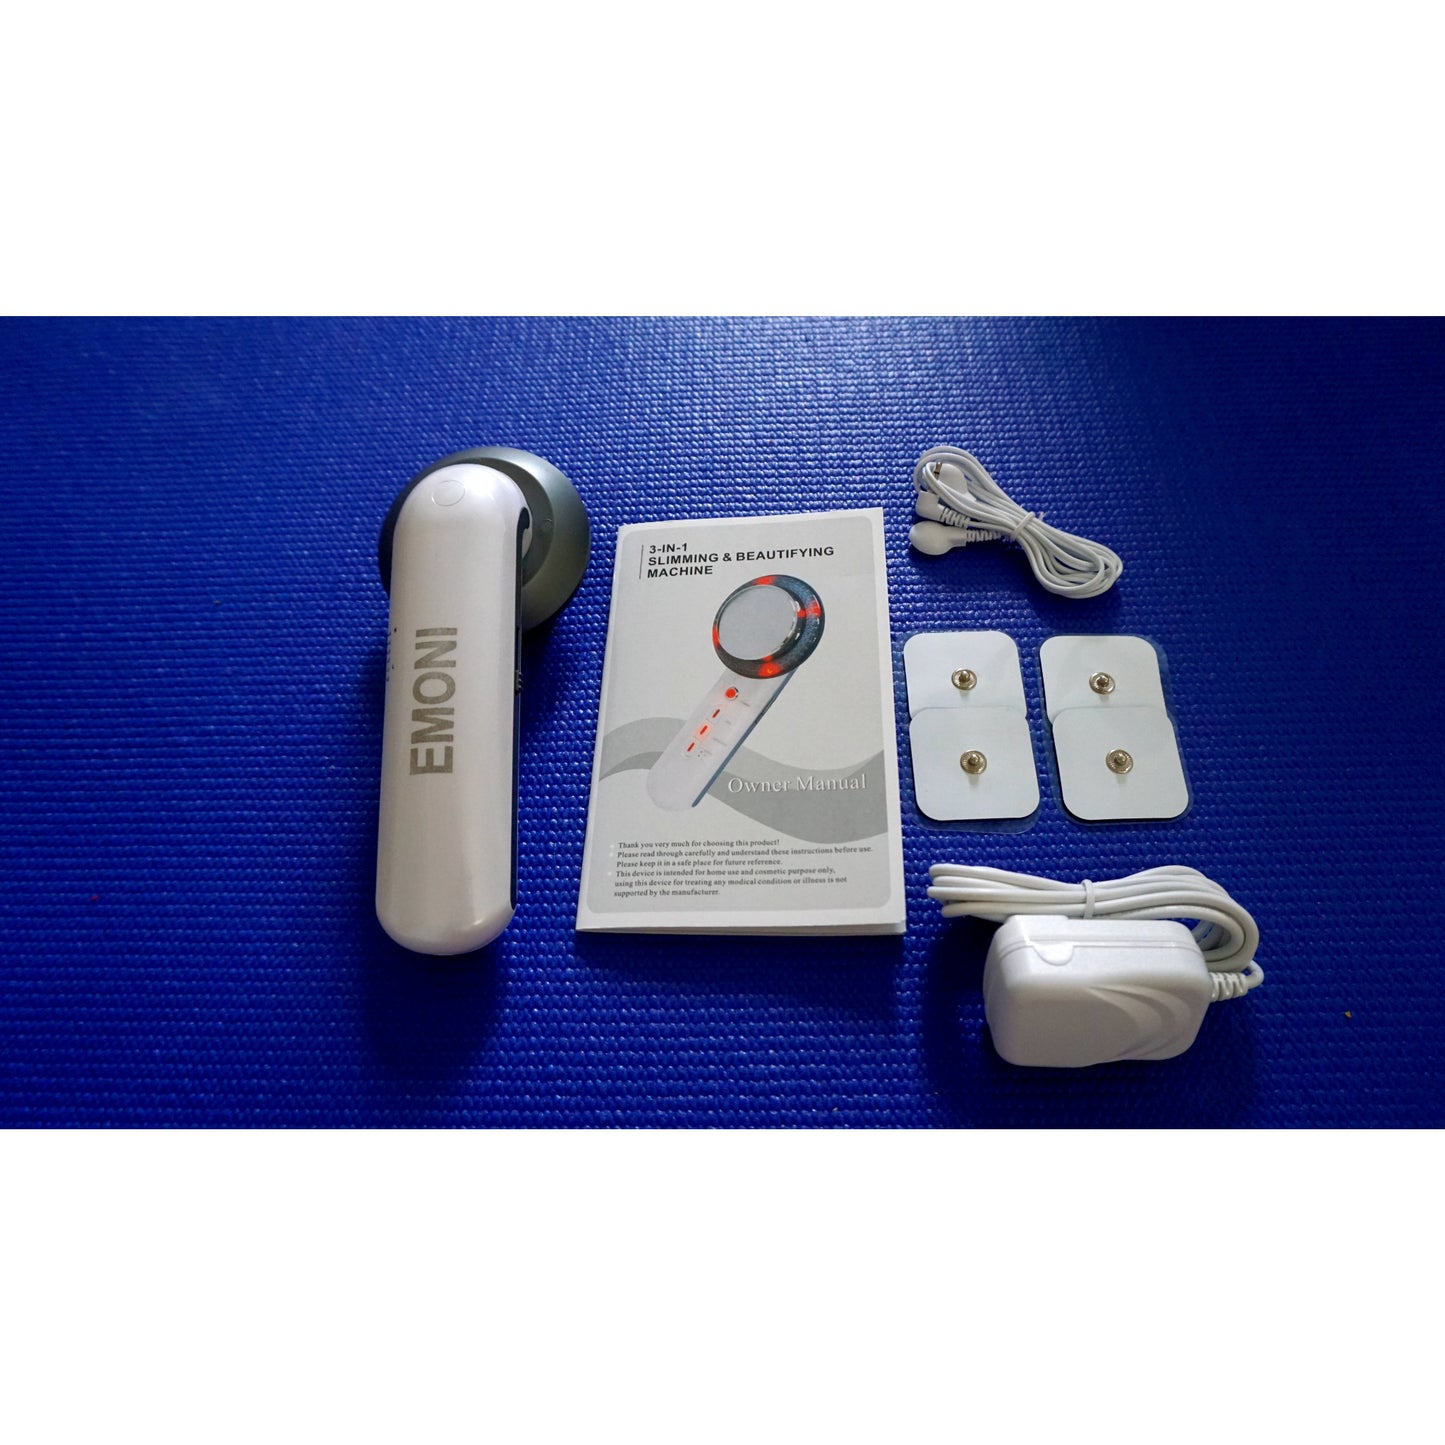 Slimming And Cellulite Reducing Cavitation Device - Emoni Fit